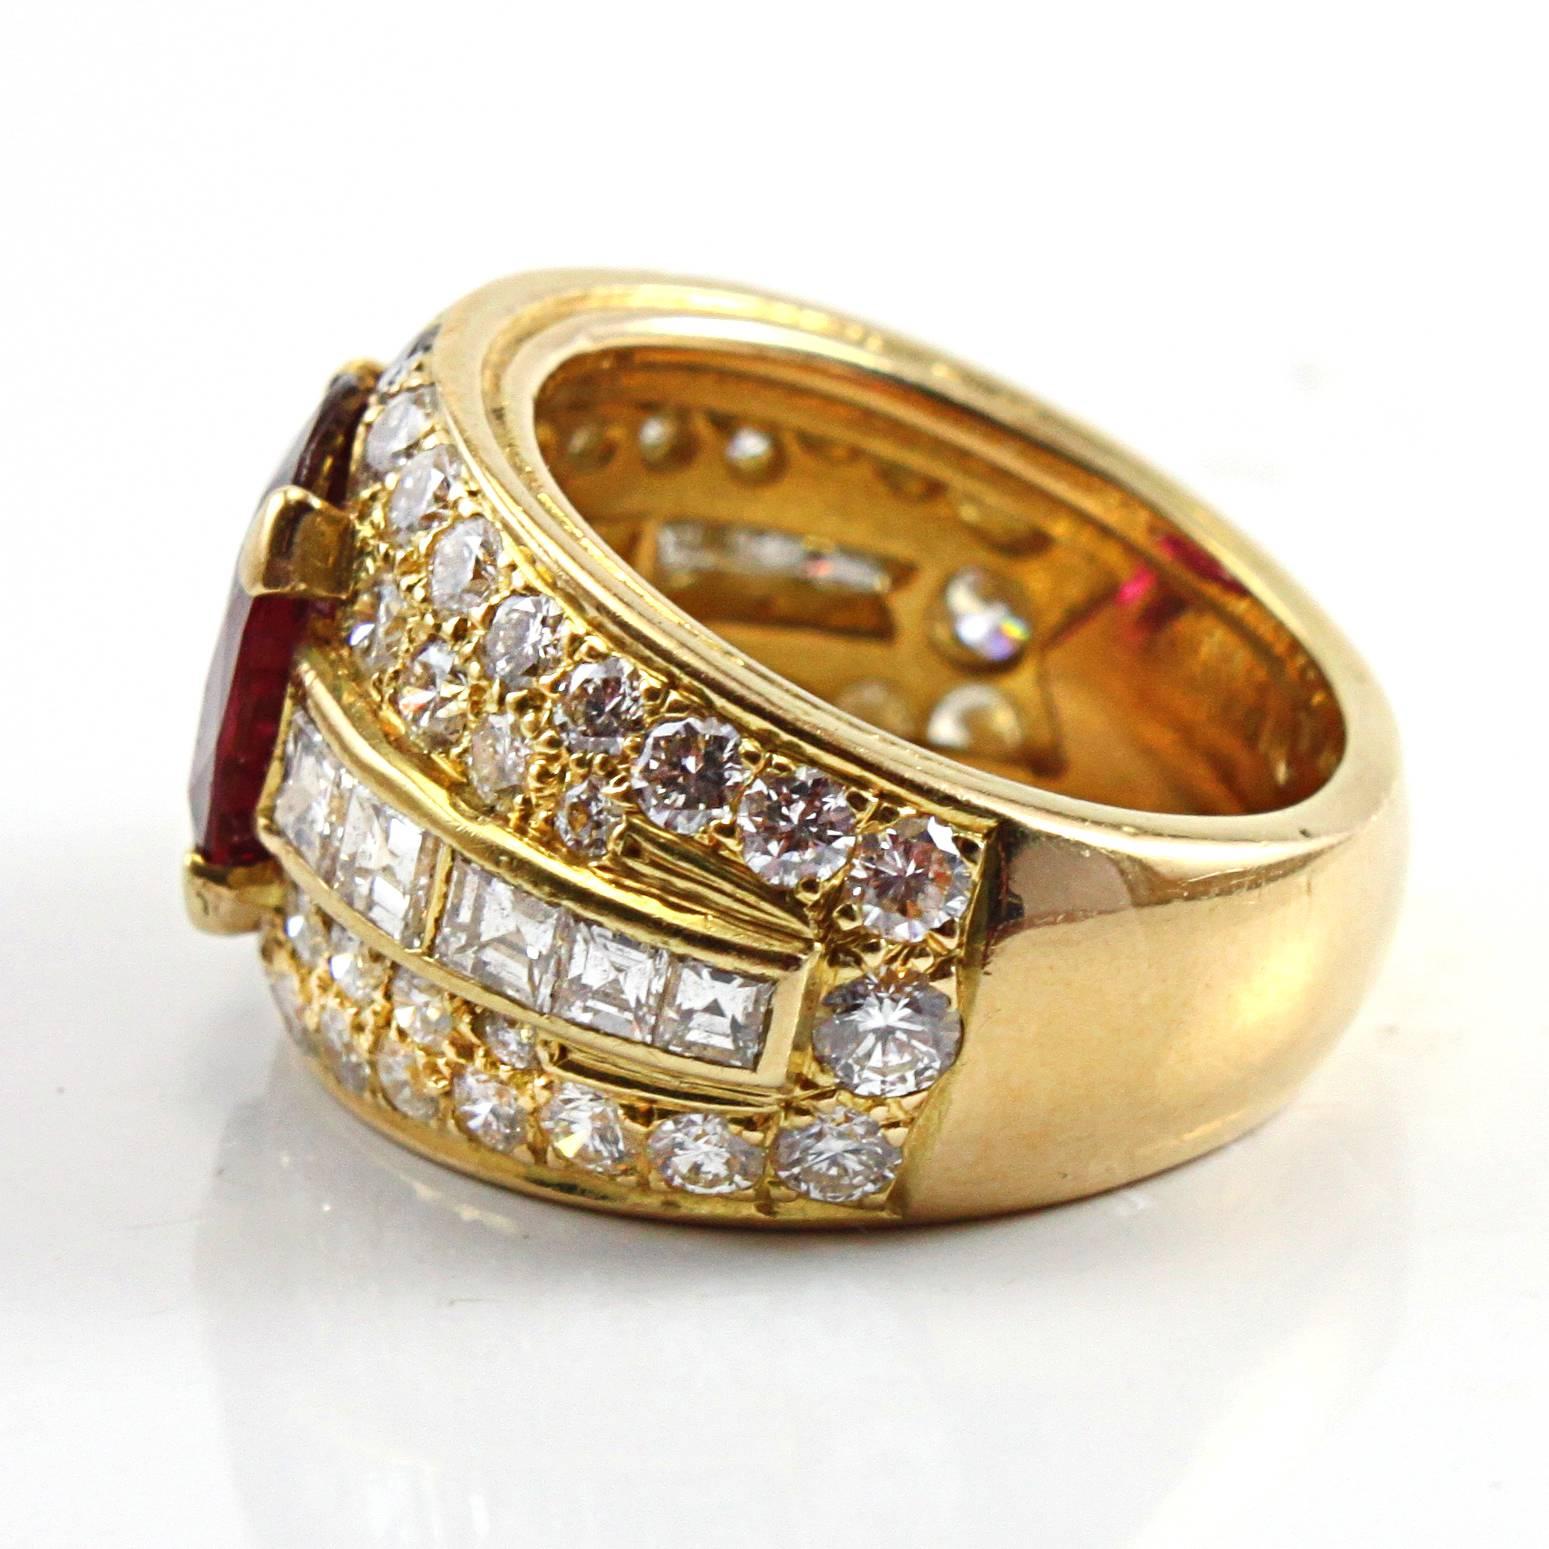 Ruby and diamond ring in 18k yellow gold, 1960s. The ruby in the centre is a beautiful gemstone with a vivid red colour and extra ordinary crystal. It is surrounded by round brilliant and emerald cut diamonds of very high quality (D/E colour and a